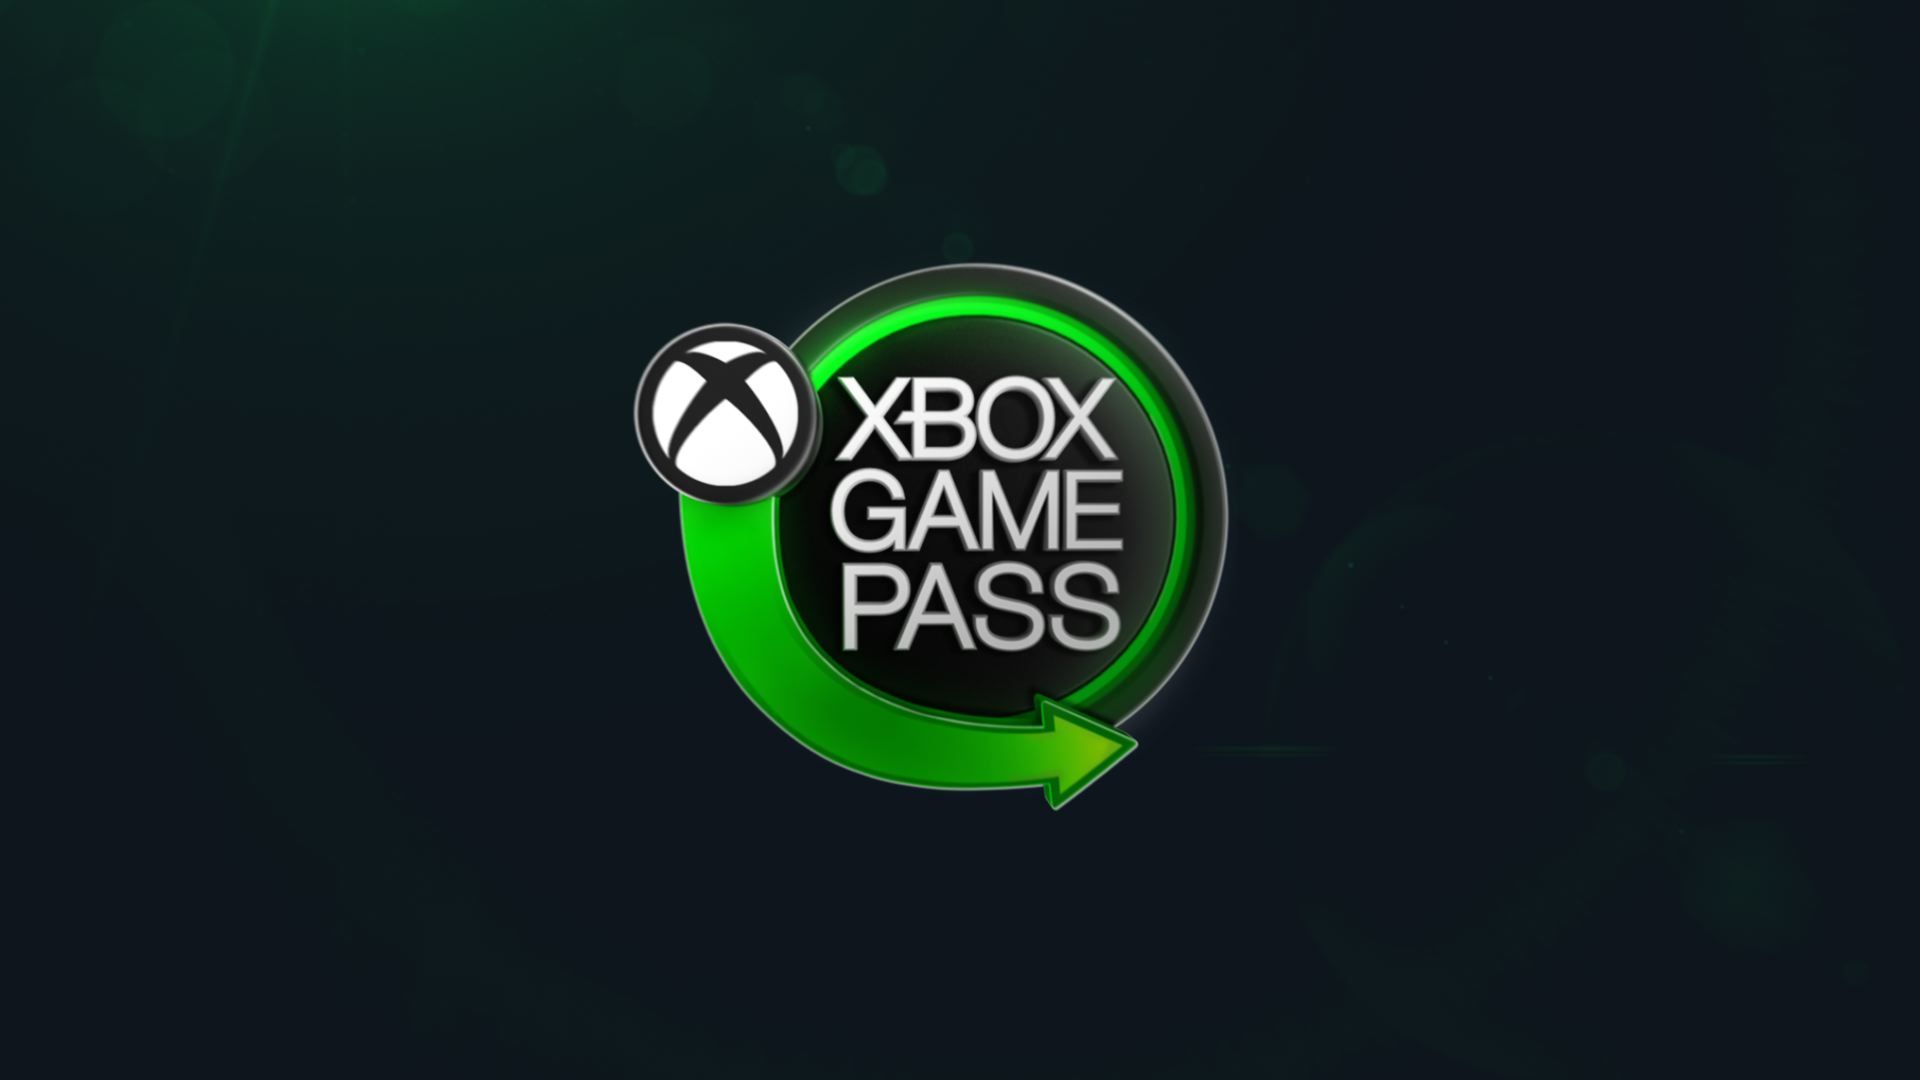 A new batch of games in Game Pass